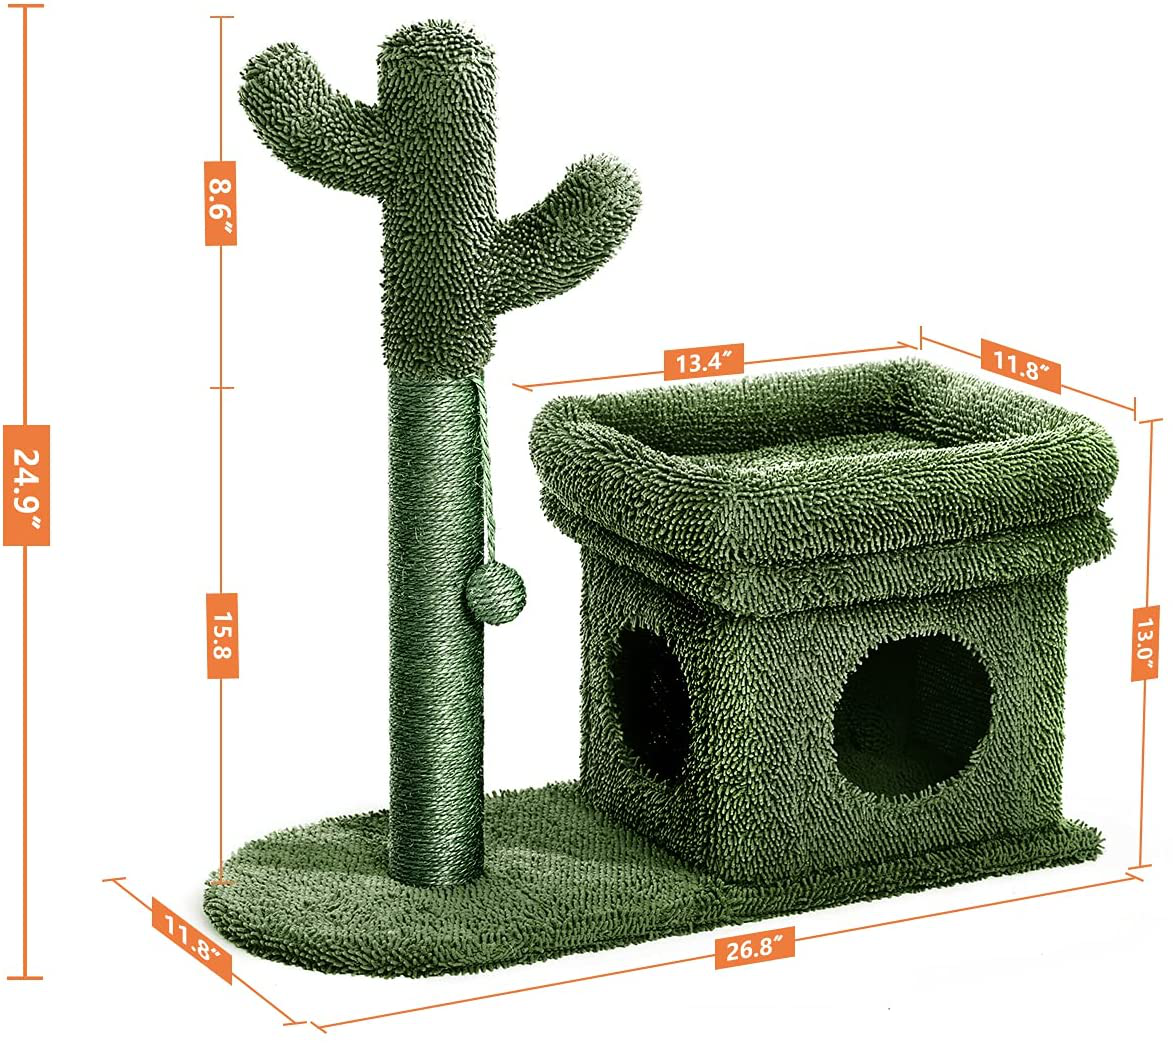 Catinsider 2 in 1 Cat Scratching Post Kitty Condo with Dangling Ball for Small Cats Green Animals & Pet Supplies > Pet Supplies > Cat Supplies > Cat Furniture Catinsider   